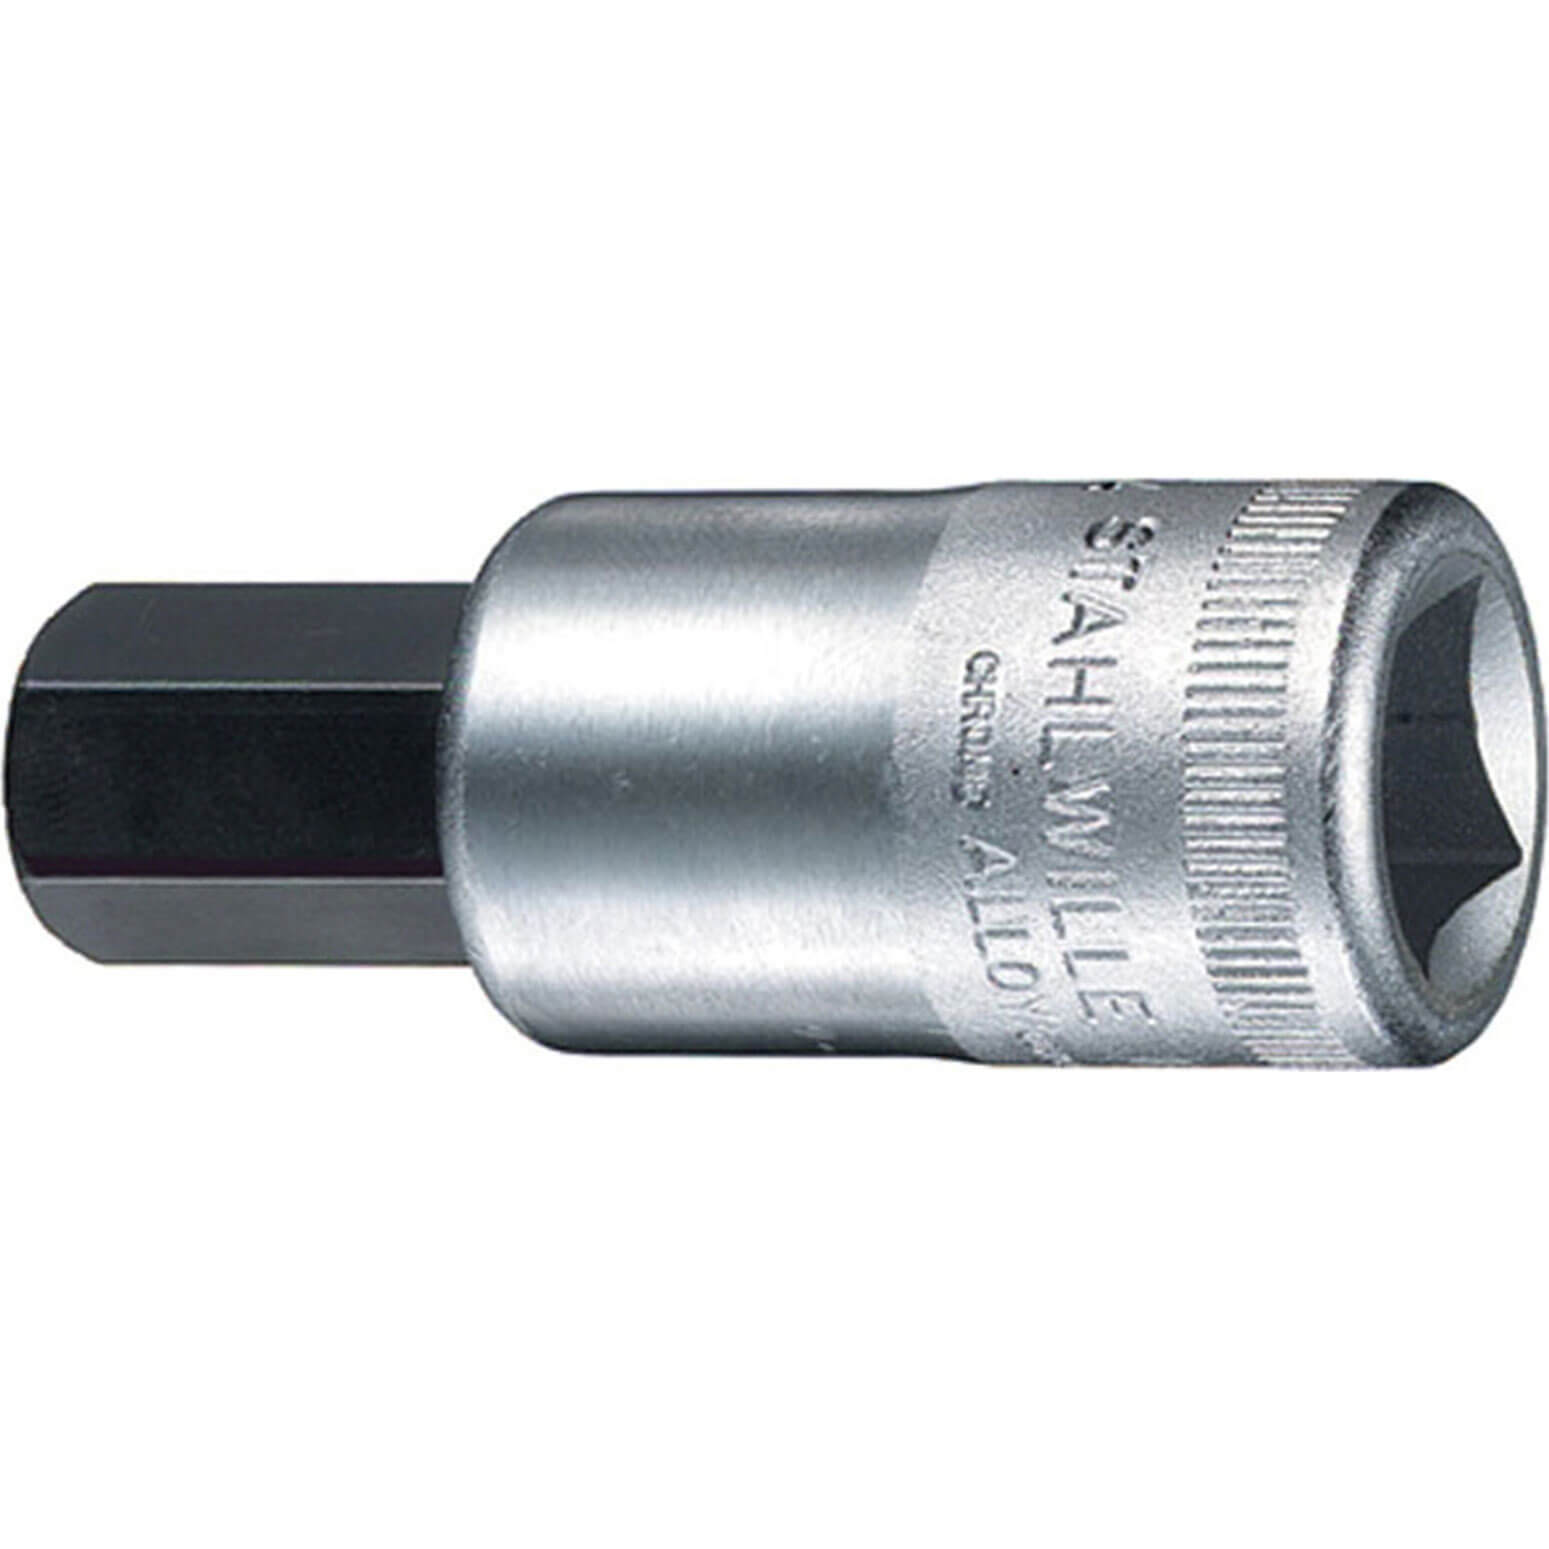 Image of Stahlwille 1/2" Drive INHEX Hexagon Socket Bit Imperial 1/2" 5/8"